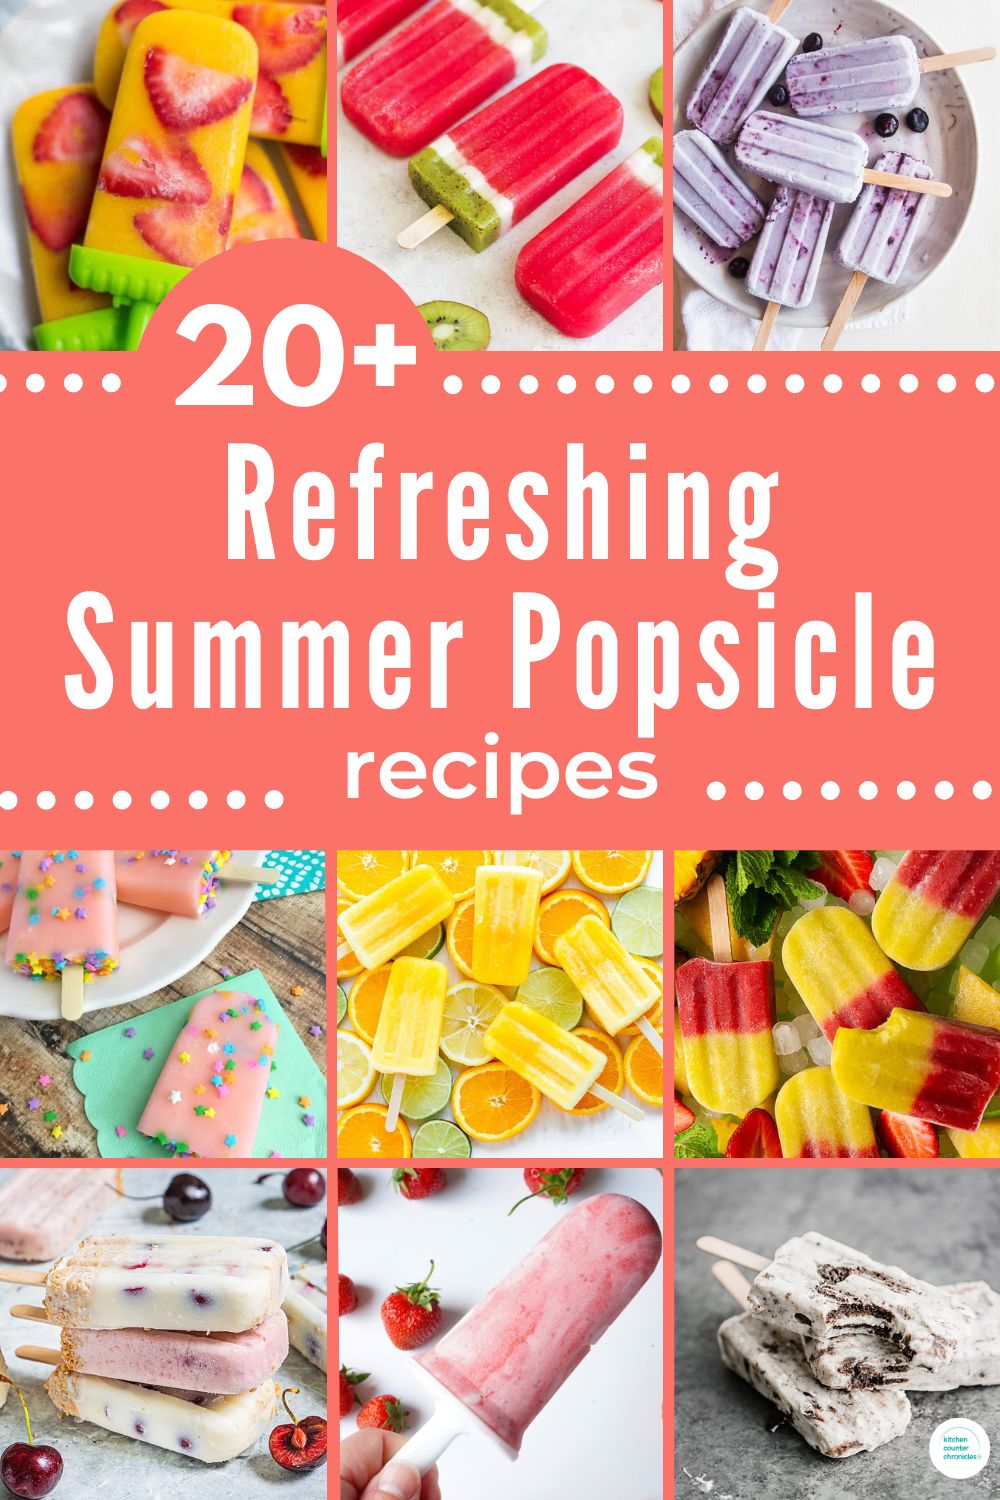 collage of popsicle images with title "20+ refreshing summer popsicle recipes.